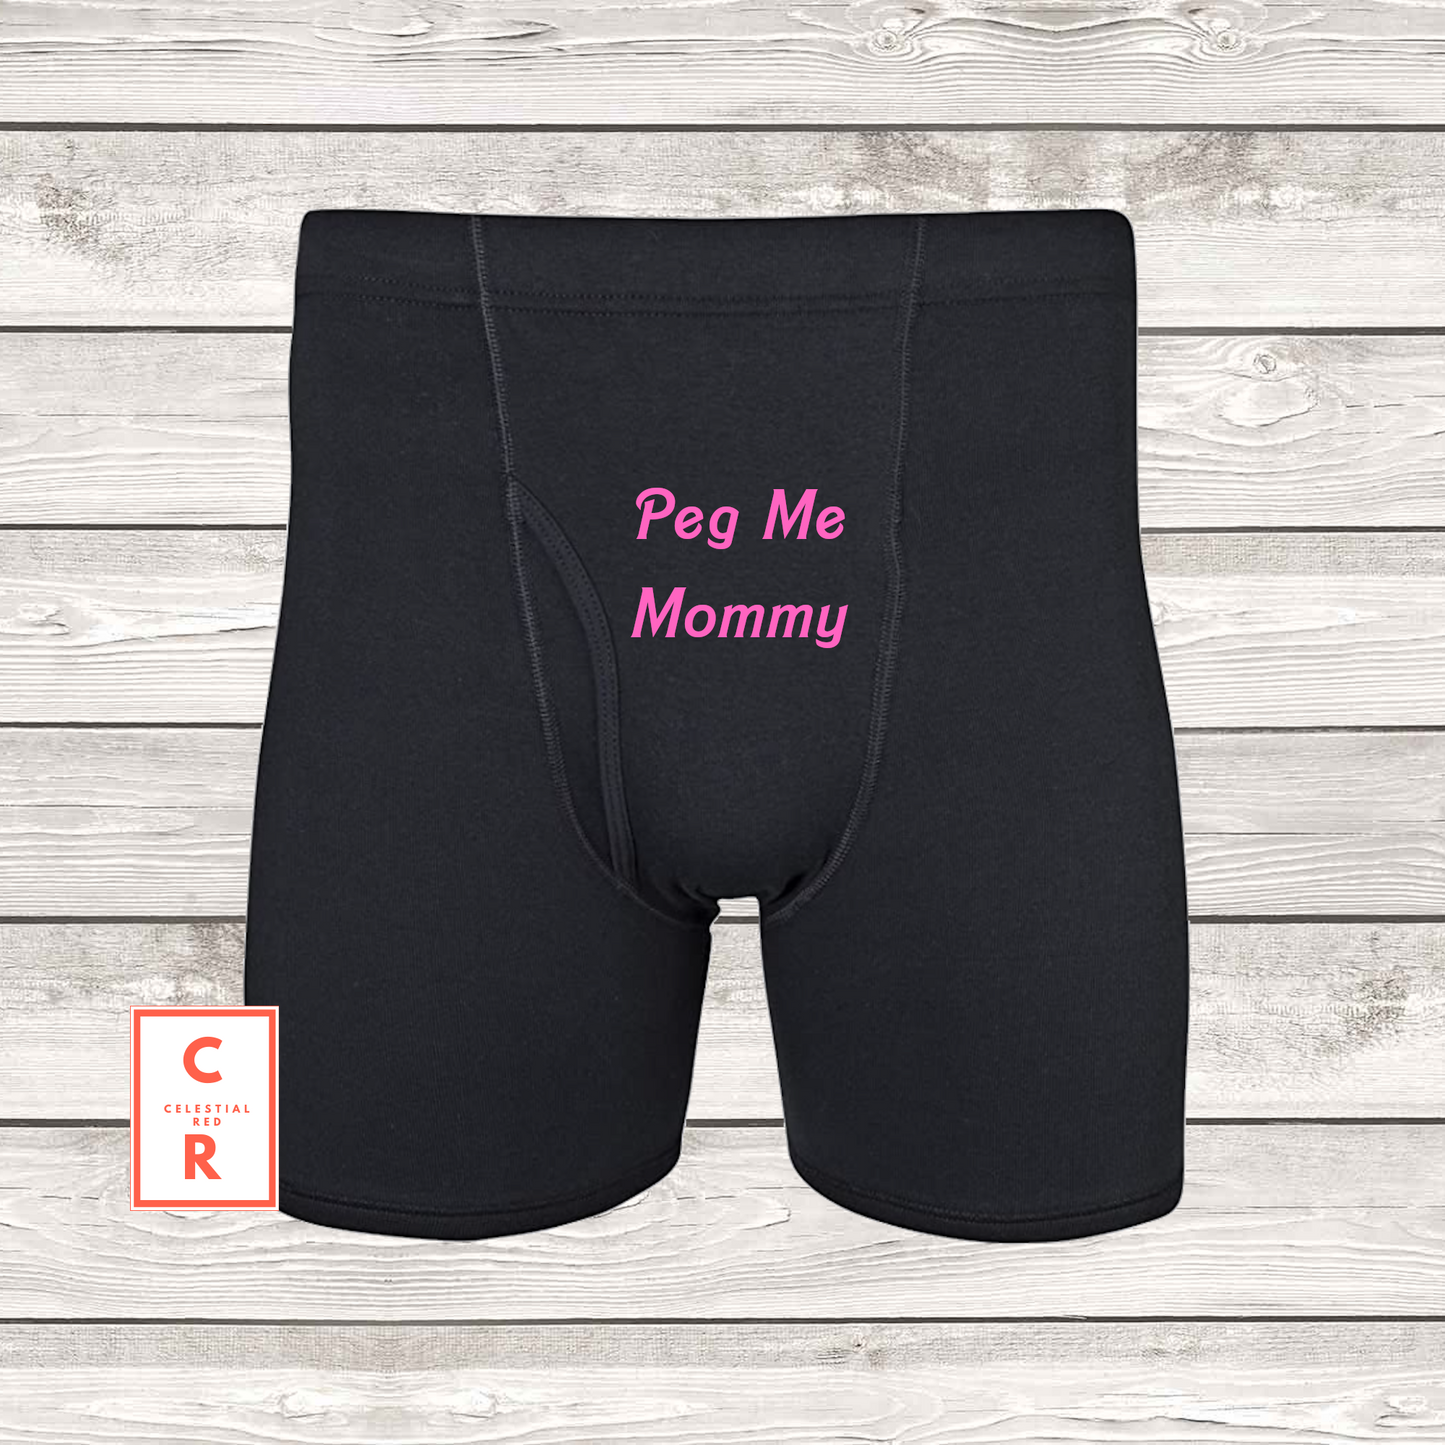 Peg Me Mommy Boxers